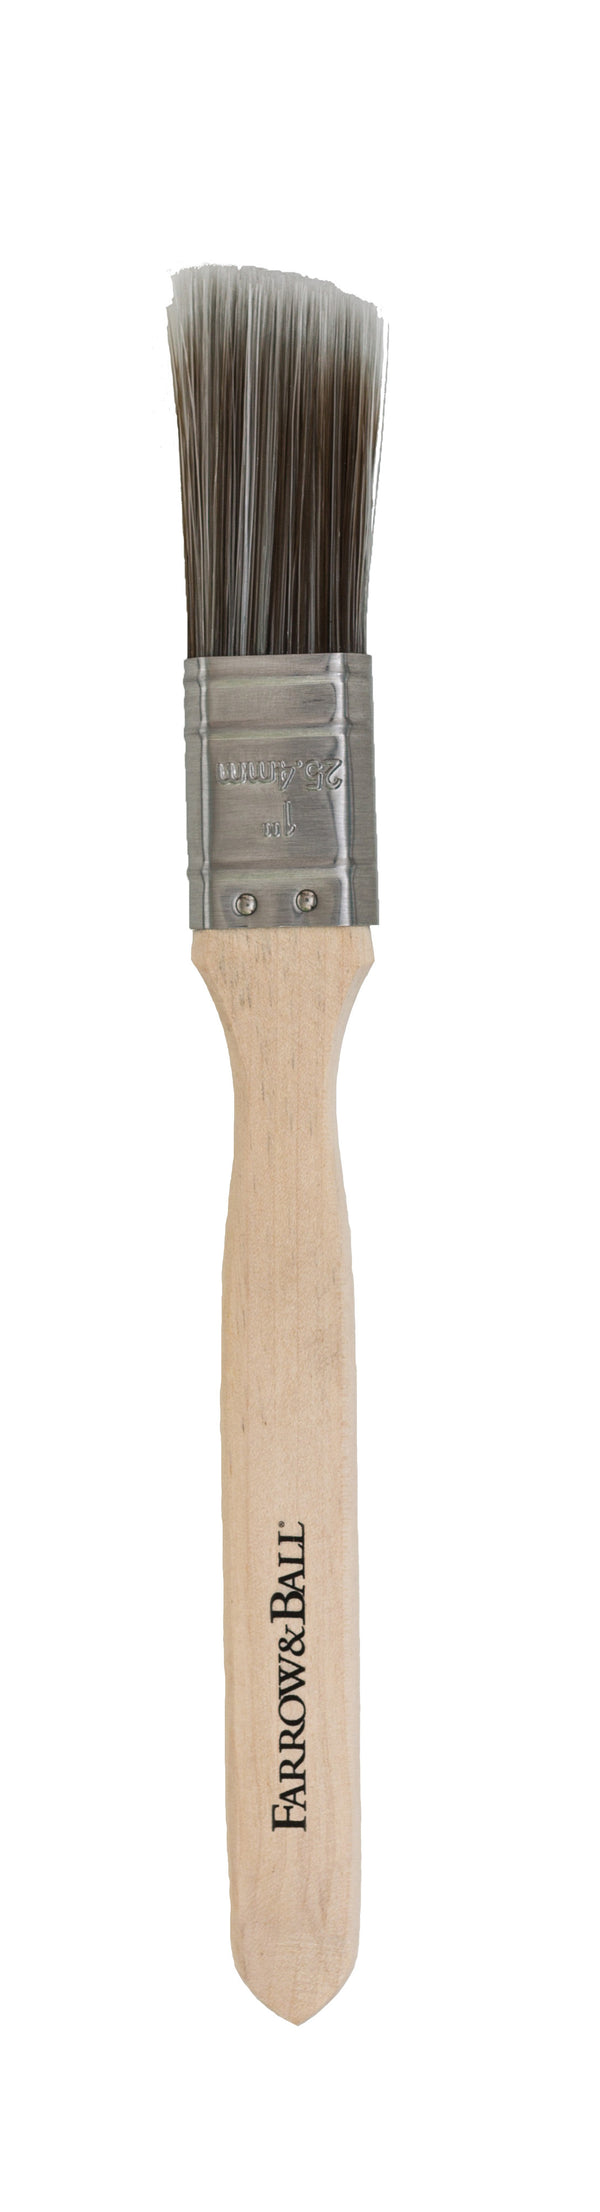 FARROW & BALL 1 INCH ANGLED BRUSH – The Paint Store Online